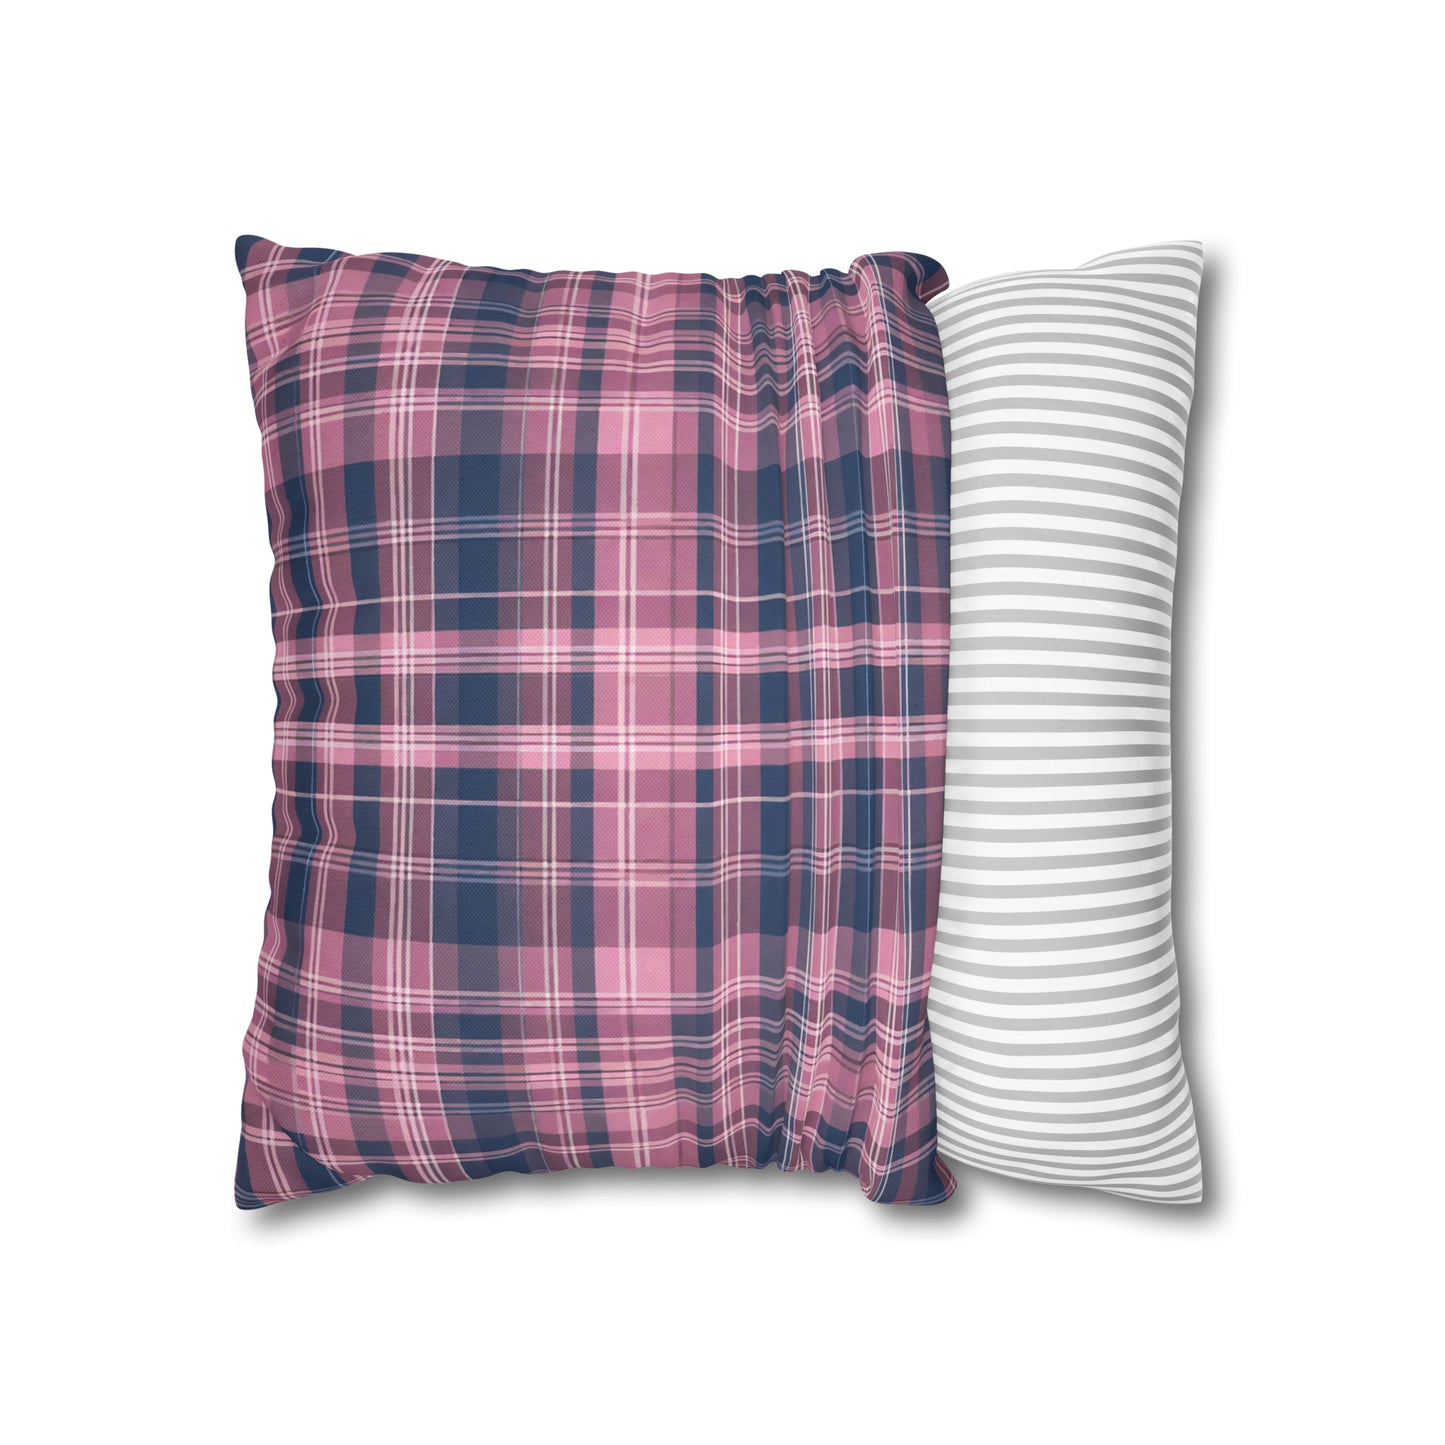 Blue And Pink Plaid Throw Pillow Cover